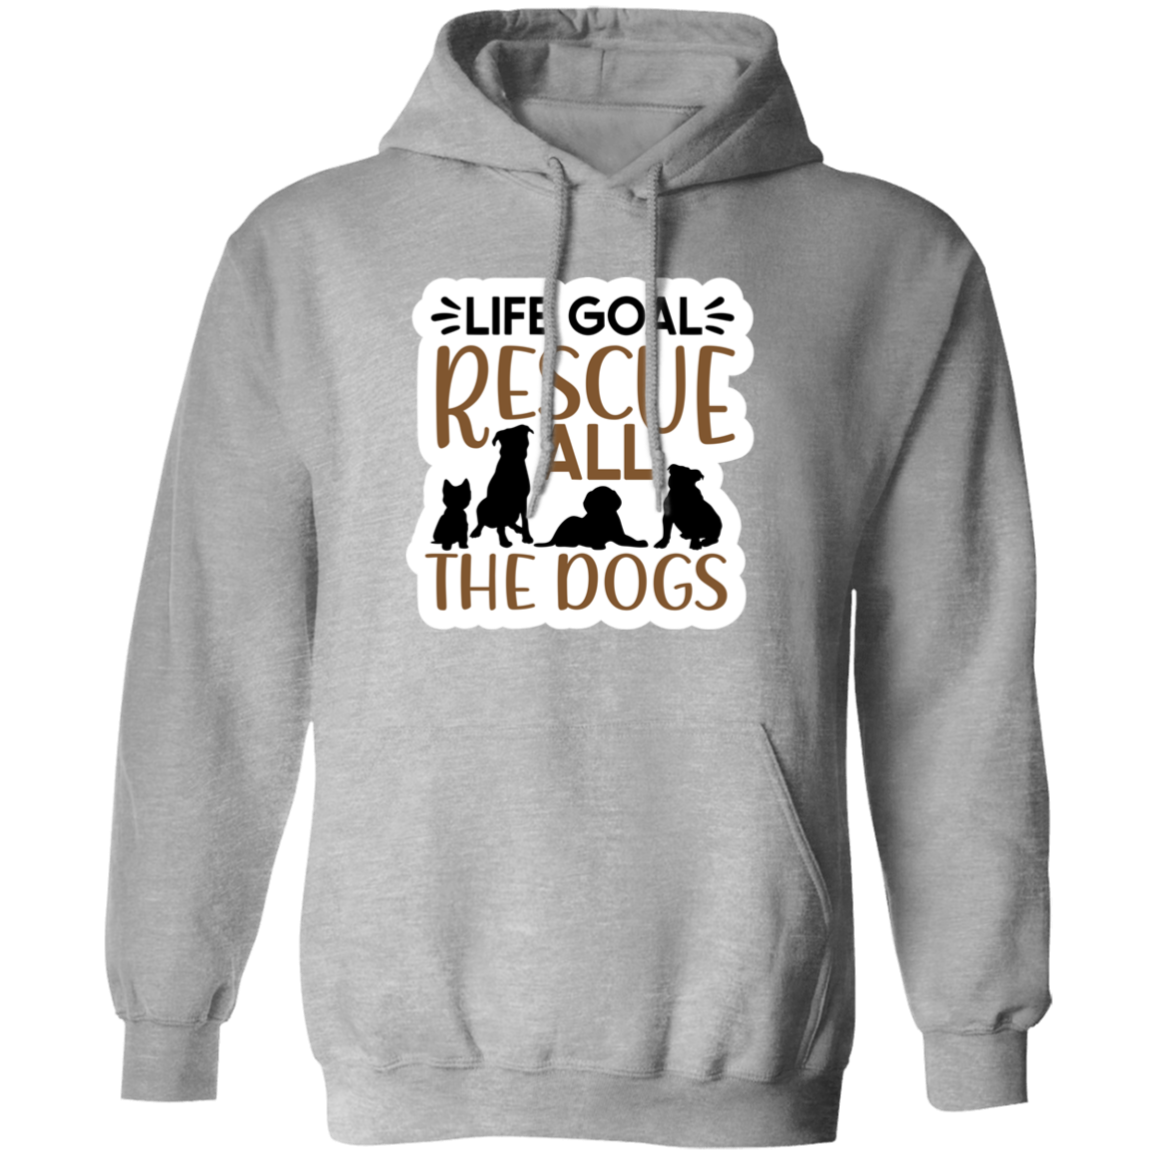 Life Goal Rescue All the Dogs Pullover Hoodie Hooded Sweatshirt